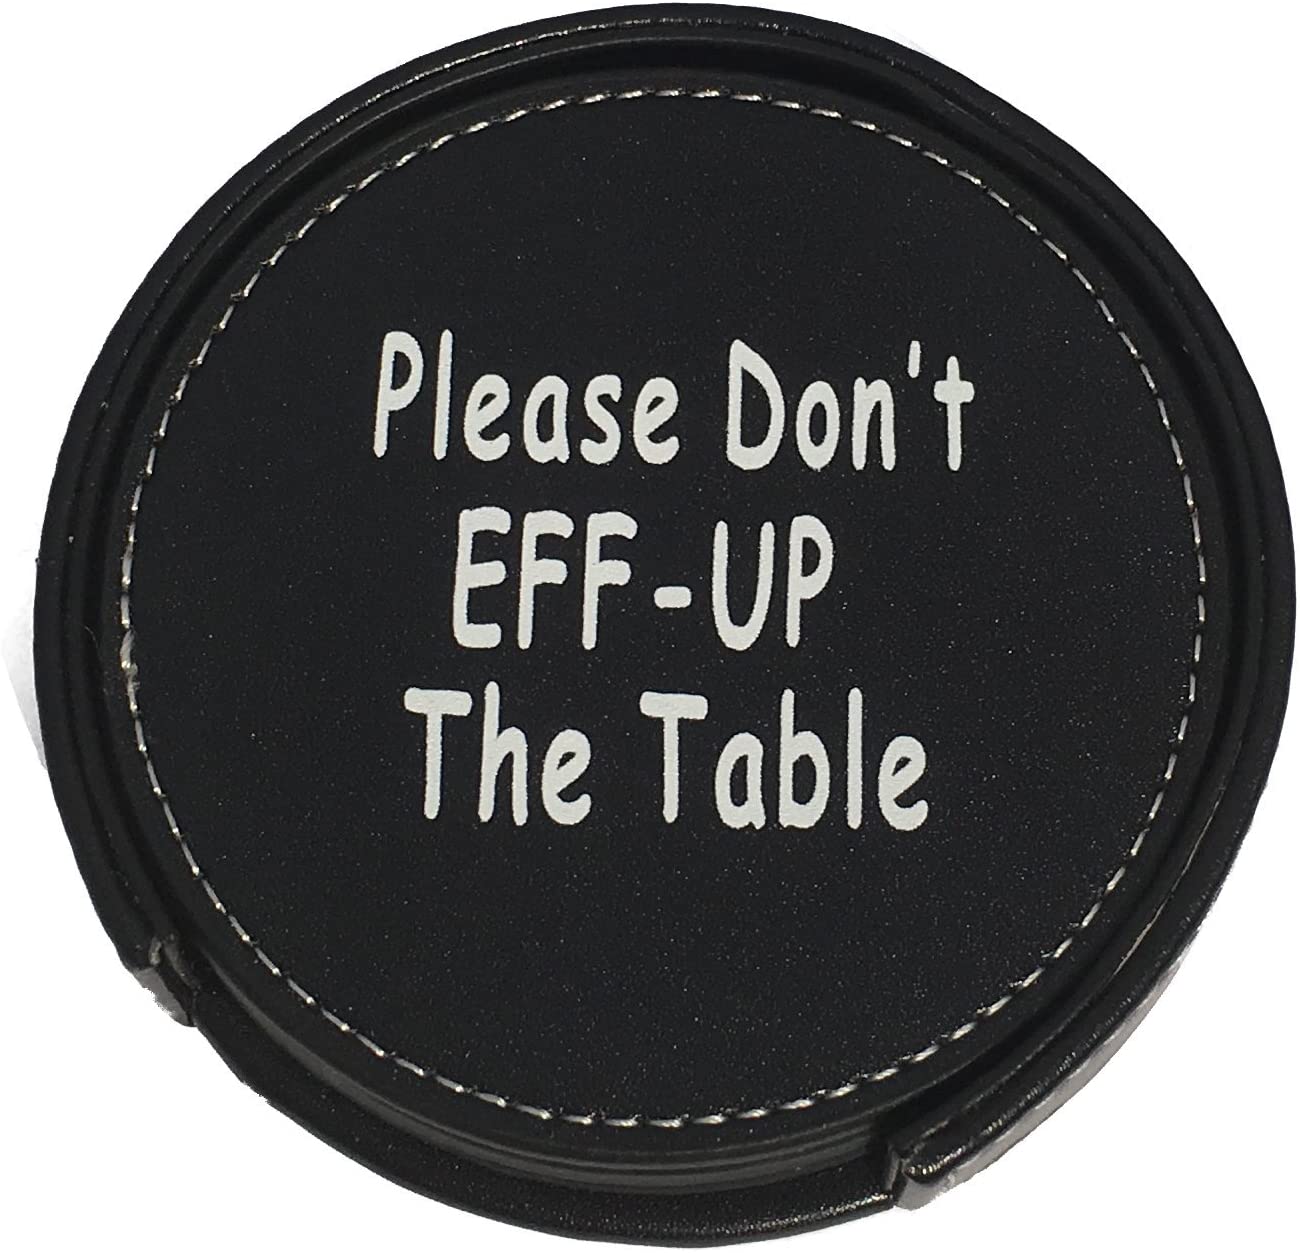 Drink Coasters Set Housewarming Gifts - Funny Gag Gift For Table, Bar And Furniture Protection - Leather Coaster For Beer, Wine, And Glass Bottles